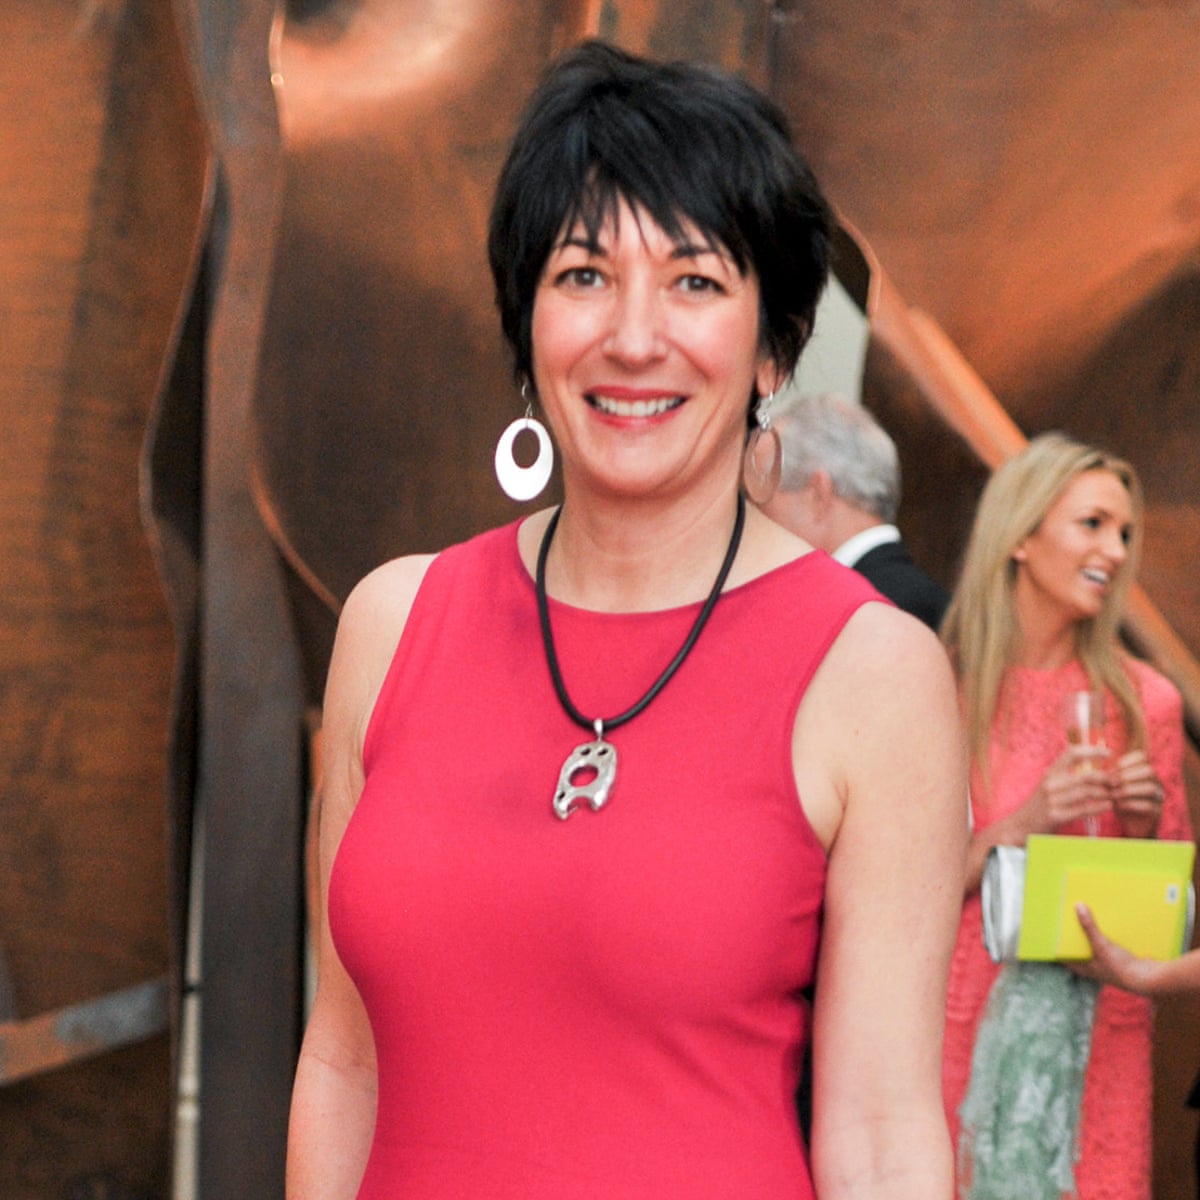 What S Next For Ghislaine Maxwell And Will She Cooperate With Prosecutors G...